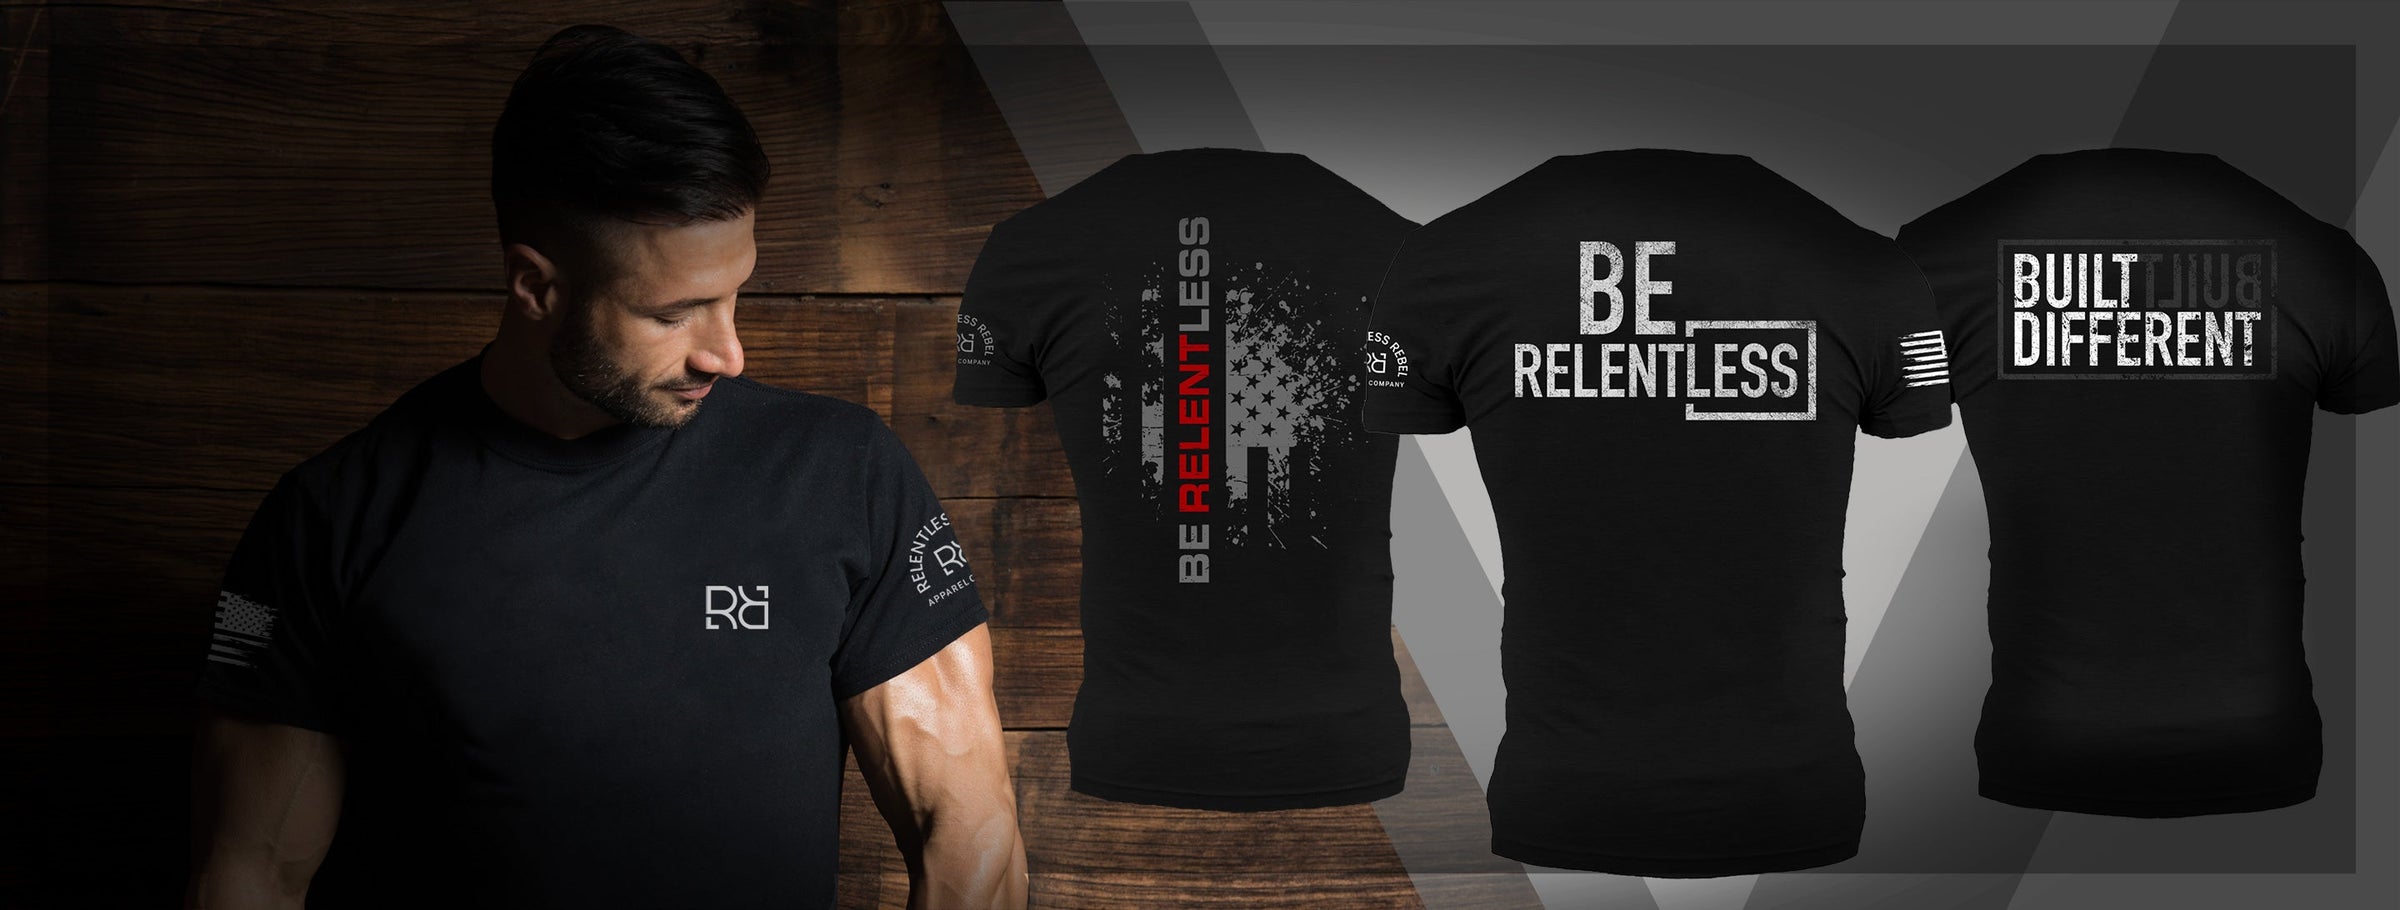 Collection showing Relentless Rebel t-shirt designs